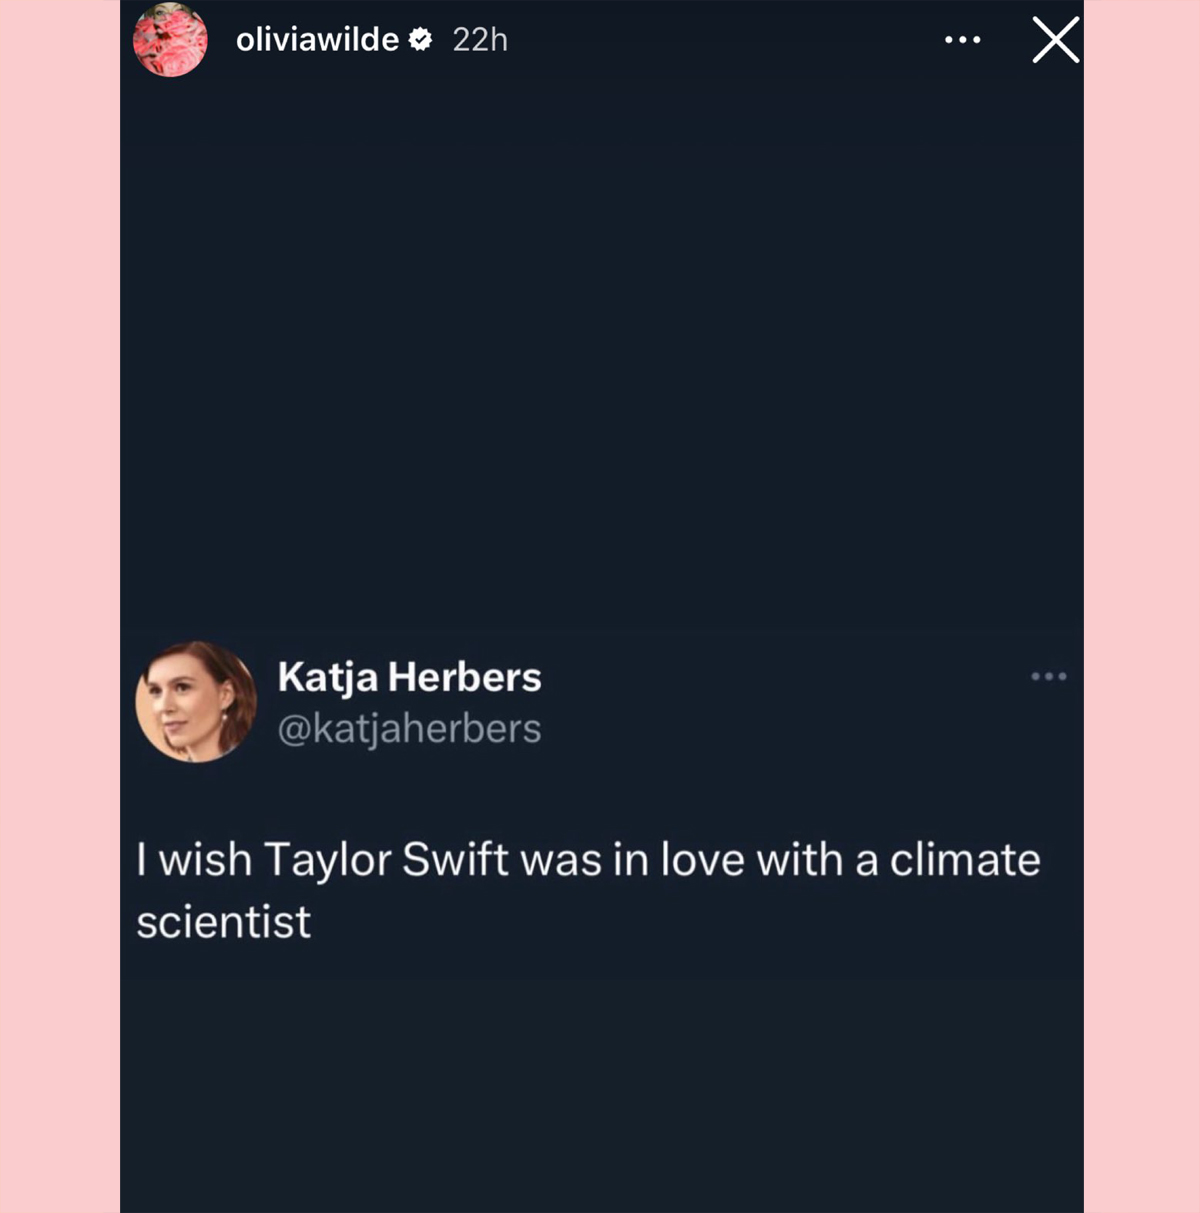 Olivia Wilde mentions Taylor Swift